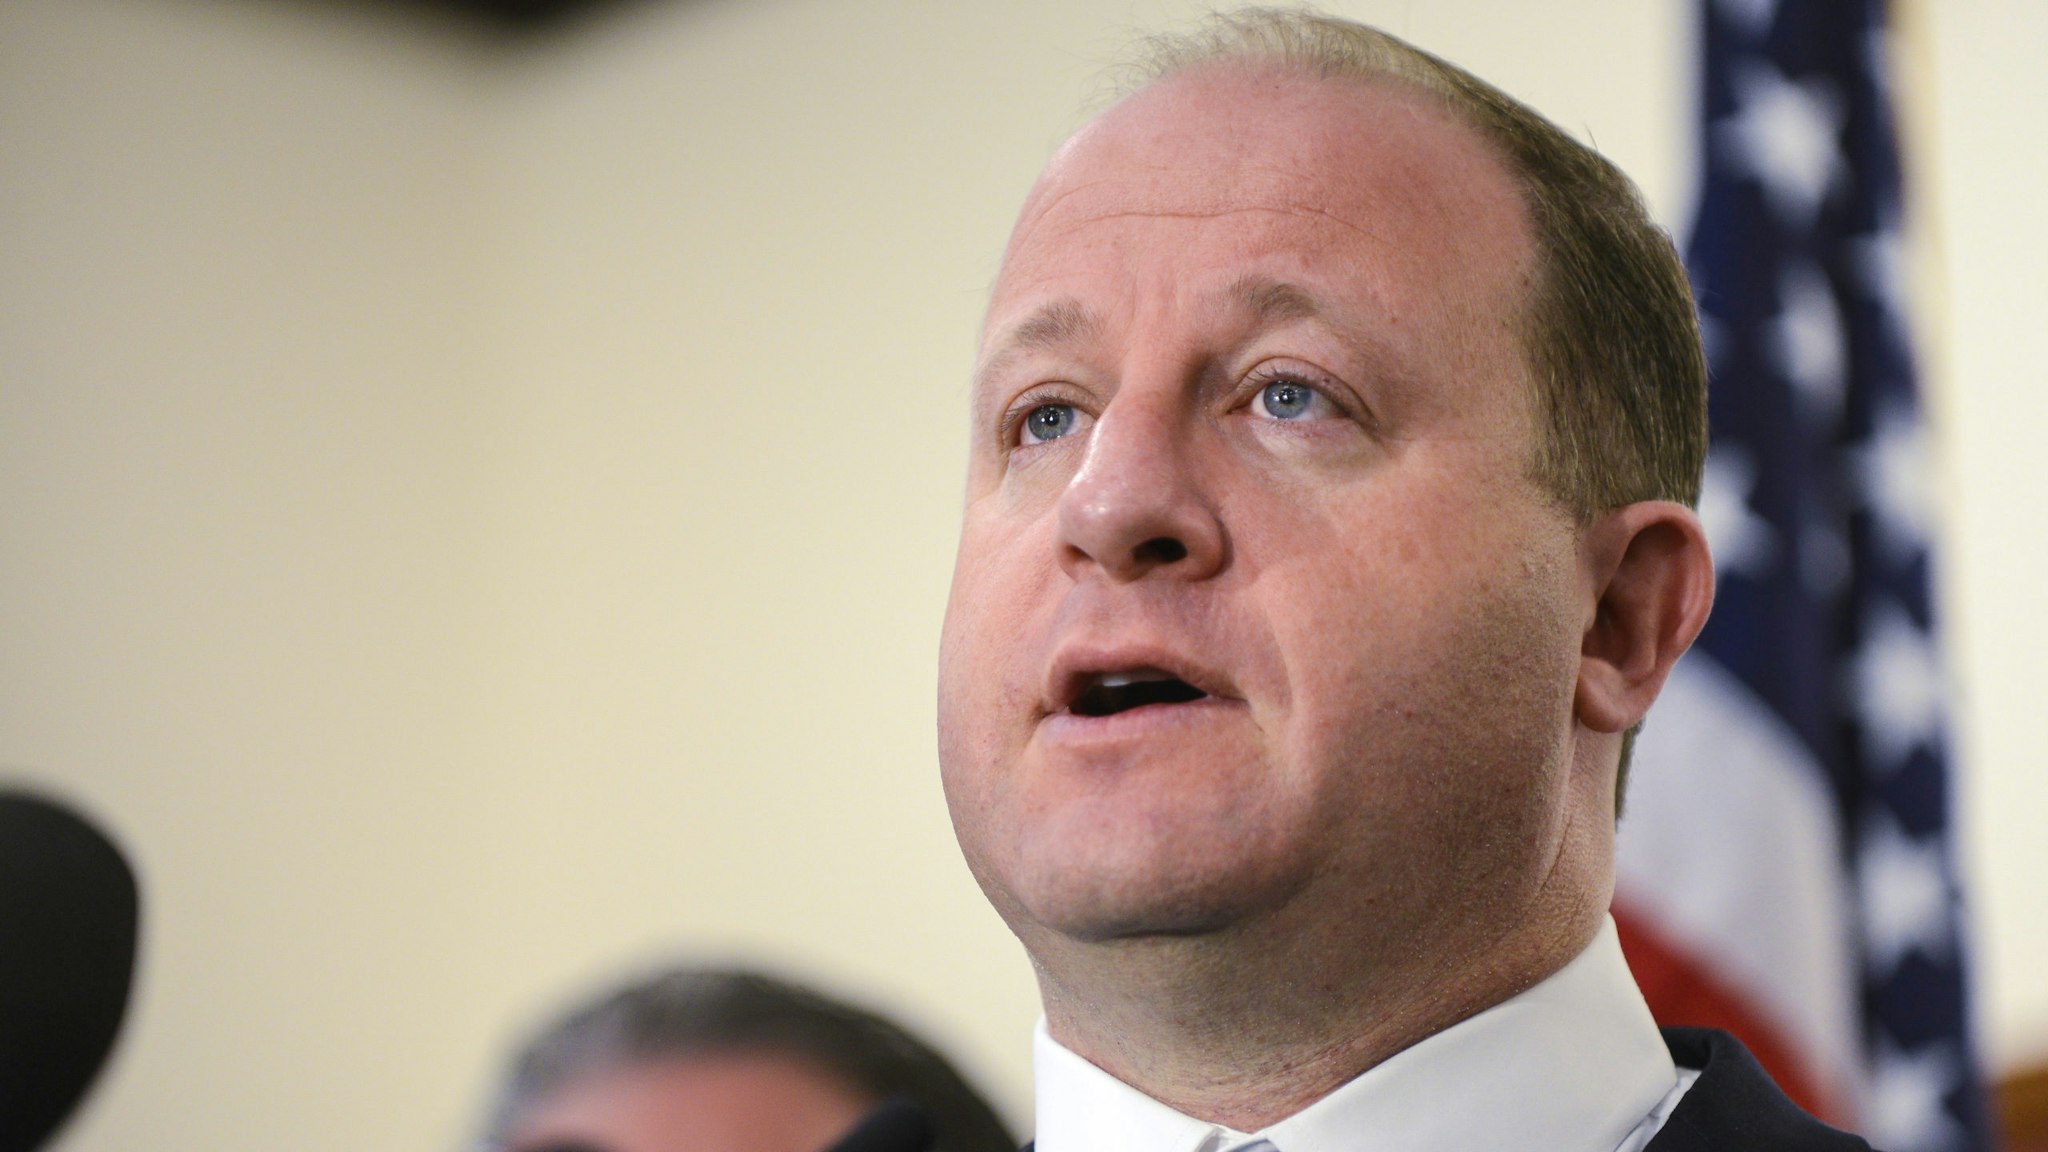 HIGHLANDS RANCH, CO - MAY 08: Colorado governor Jared Polis speaks to the media regarding the shooting at STEM School Highlands Ranch during a press conference at the Douglas County Sheriffs Office Highlands Ranch Substation on May 8, 2019 in Highlands Ranch, Colorado. One student was killed and eight others were injured in the shooting.